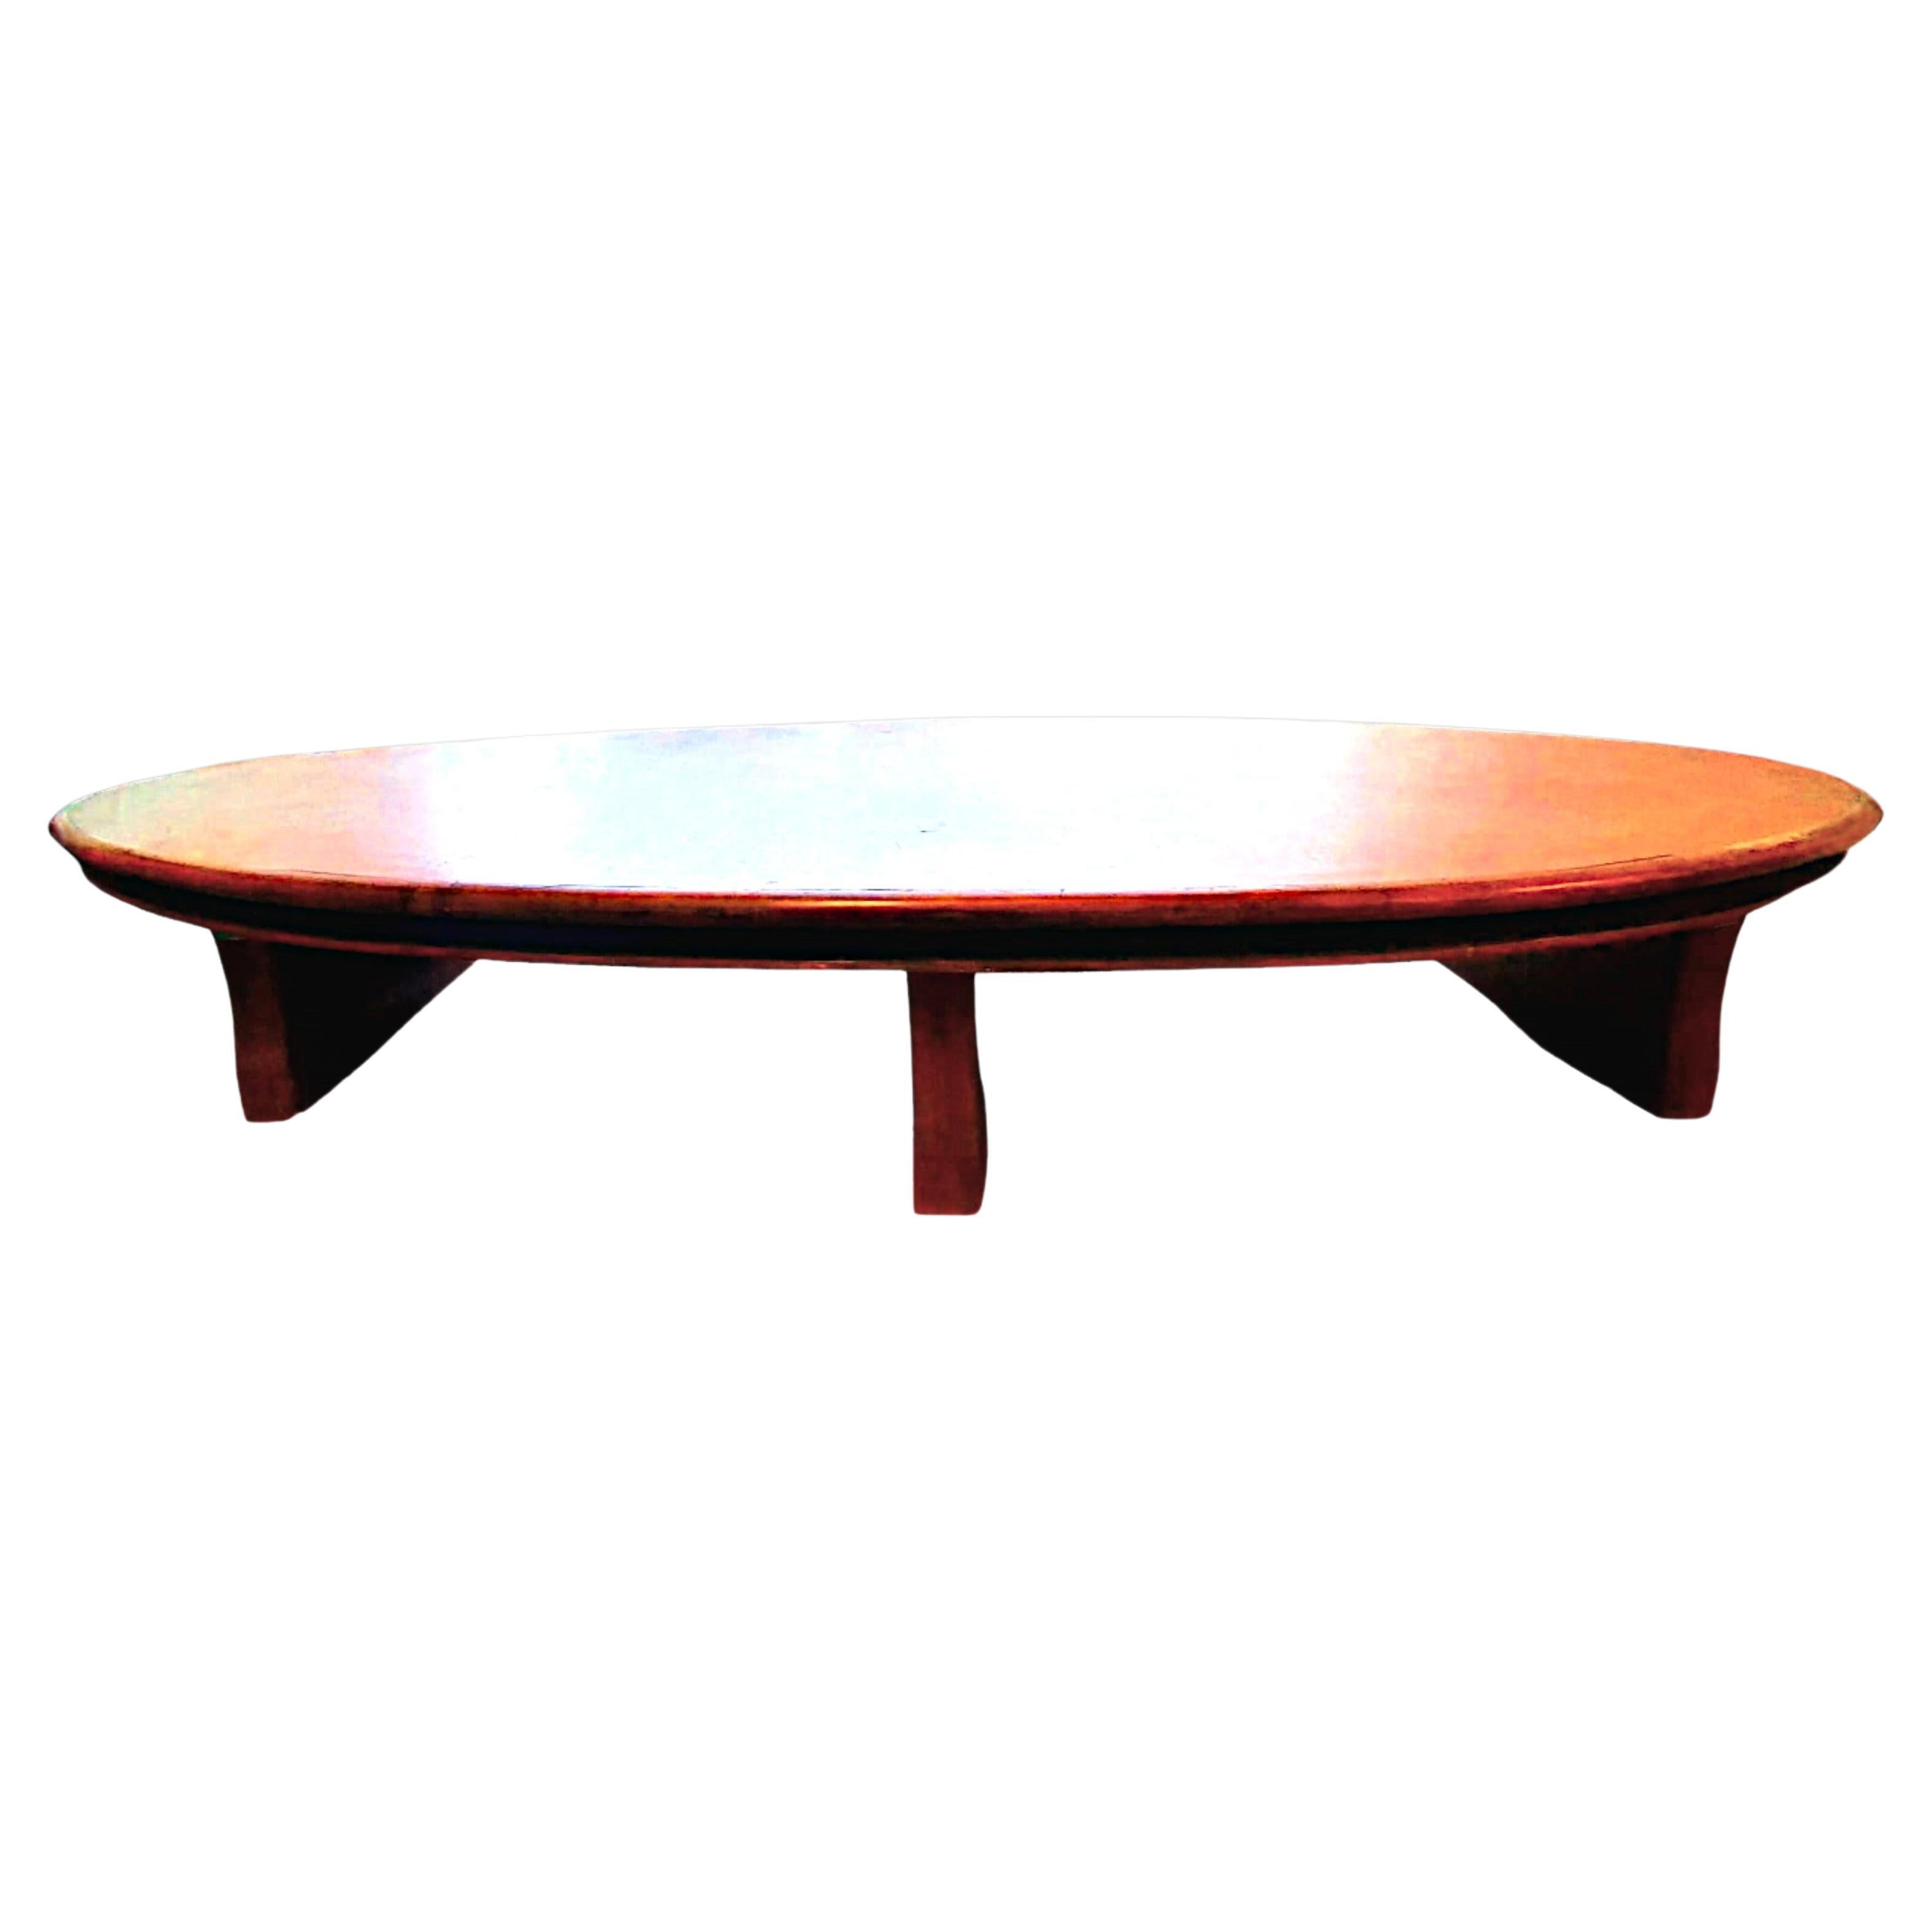 Vintage Italian Conference Table
Exceptional Vintage Italian Conference Table

We are excited to present a unique opportunity for design lovers and prestigious companies: a rare oval Italian design table from the 1910s/1920s from the meeting room of